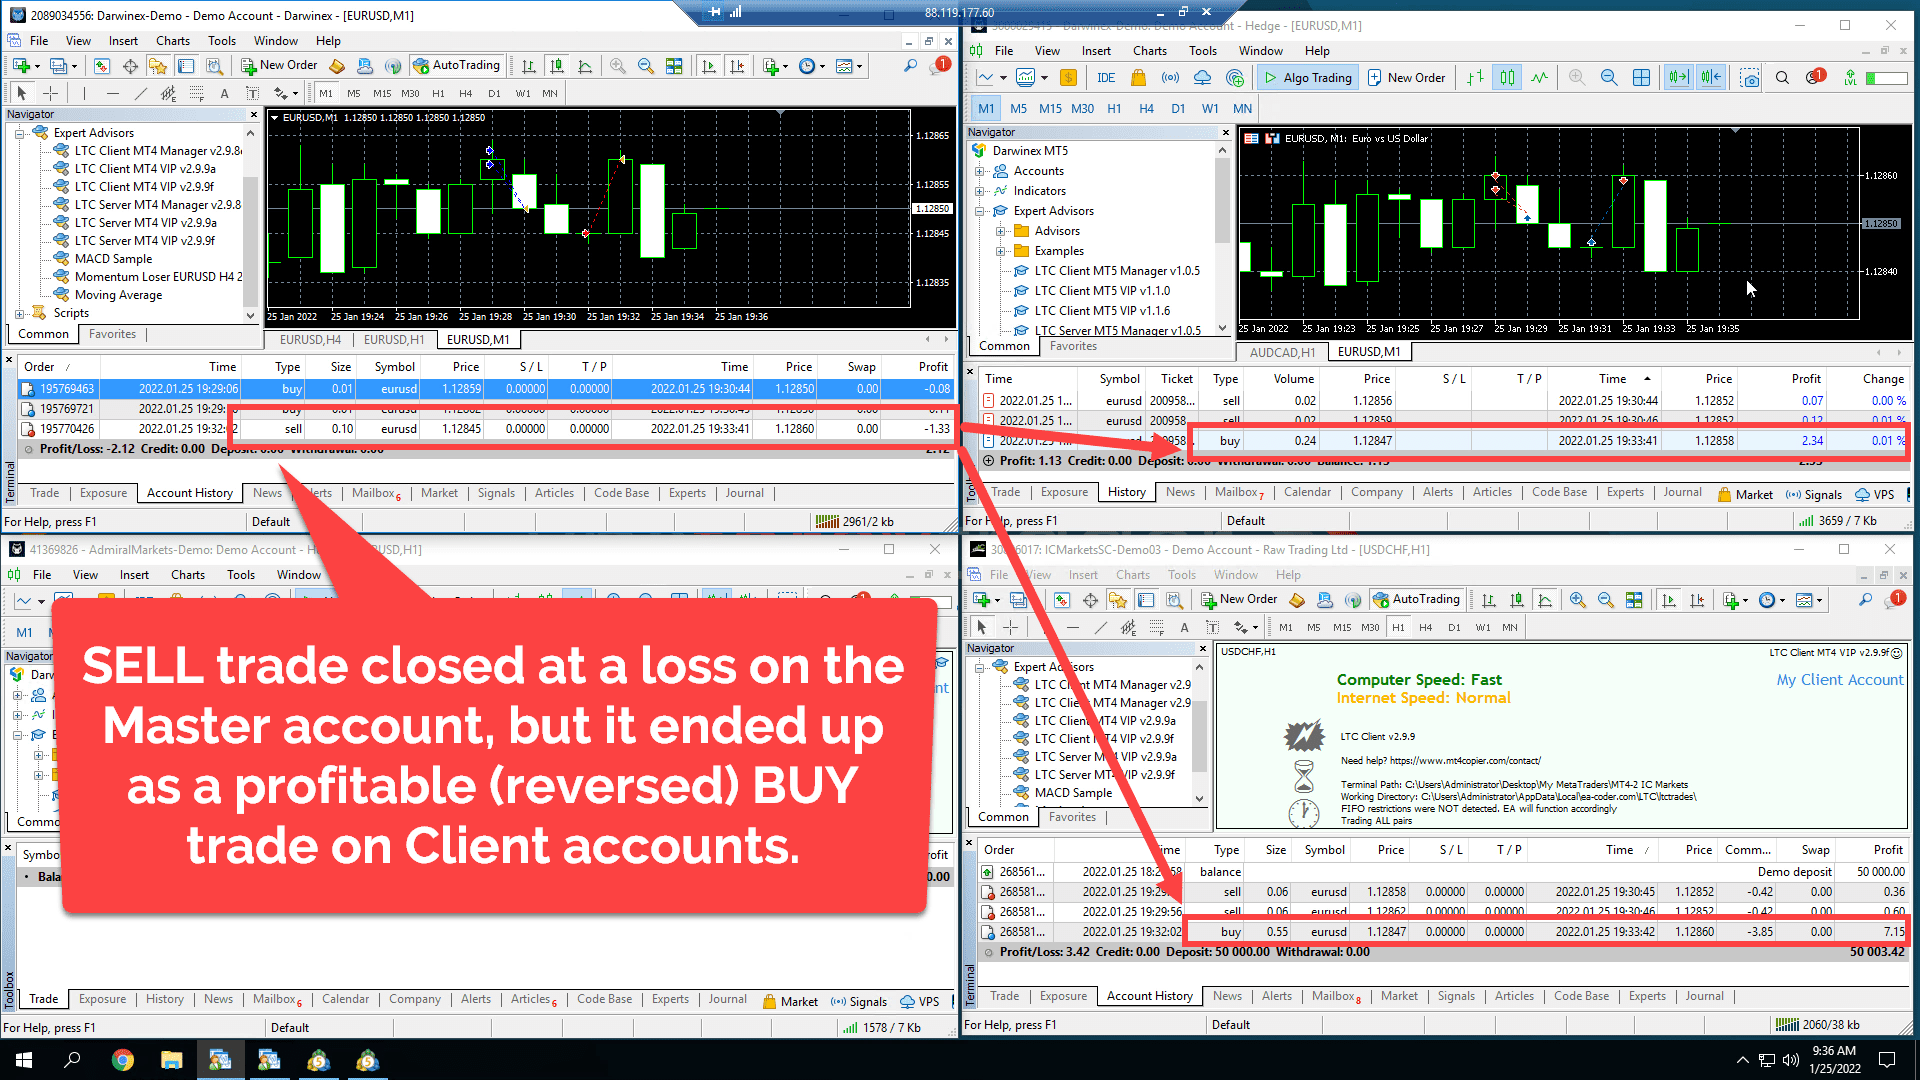 SELL trade reversed as a BUY trade and closed at profit on Client Accounts